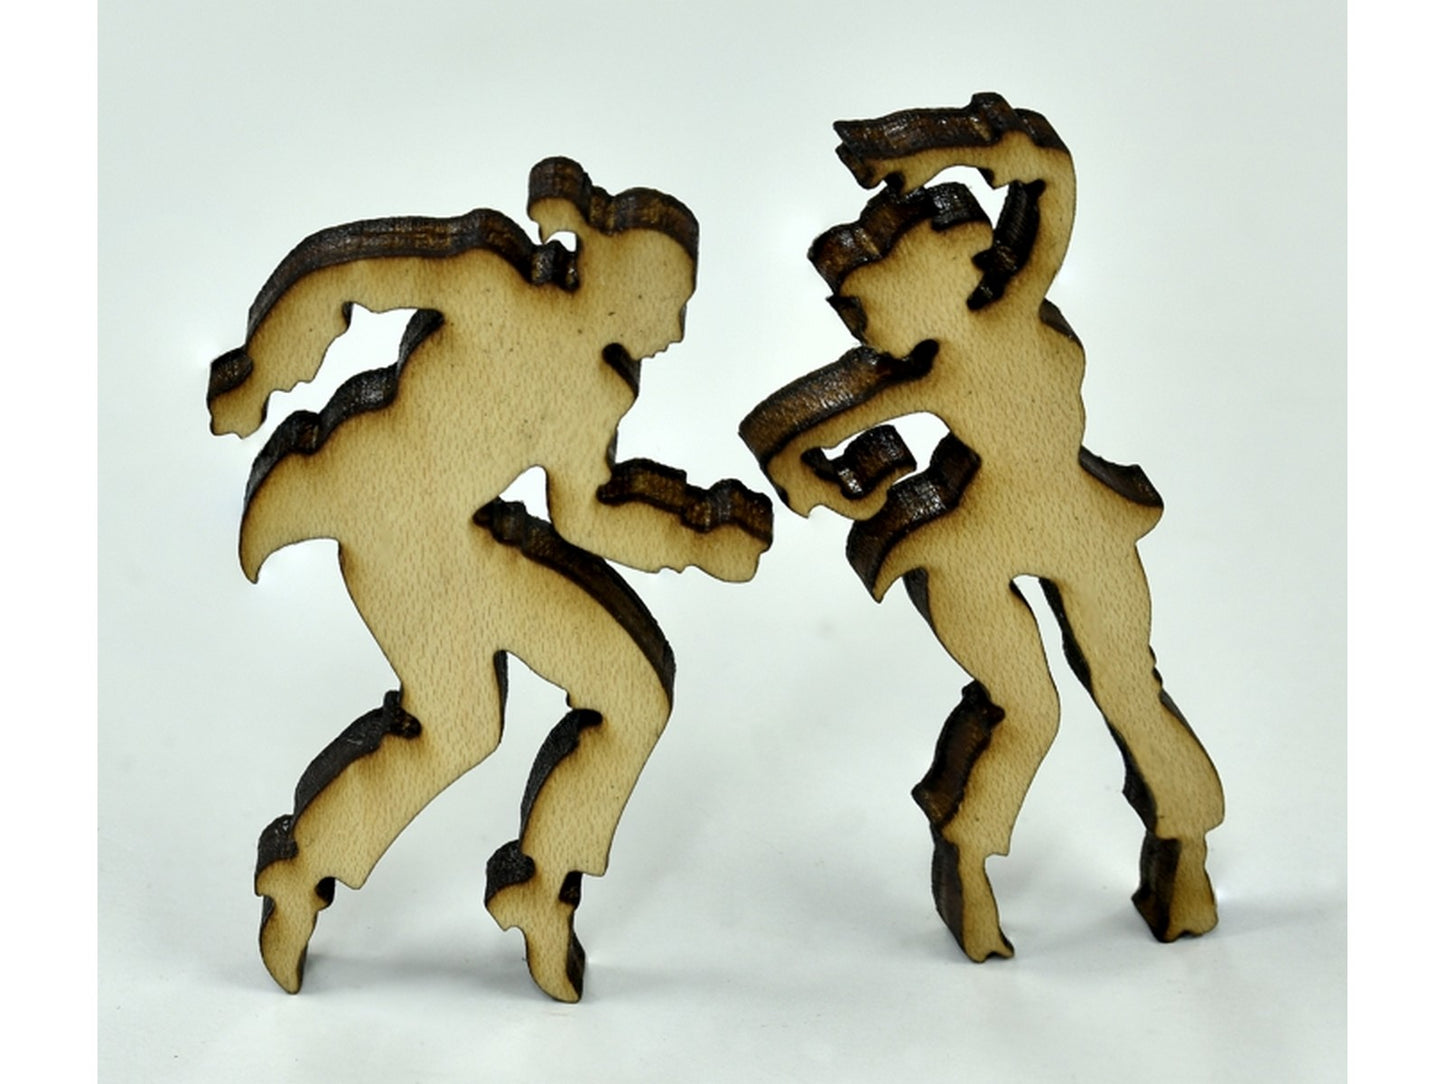 A closeup of pieces in the shape of two people dancing.